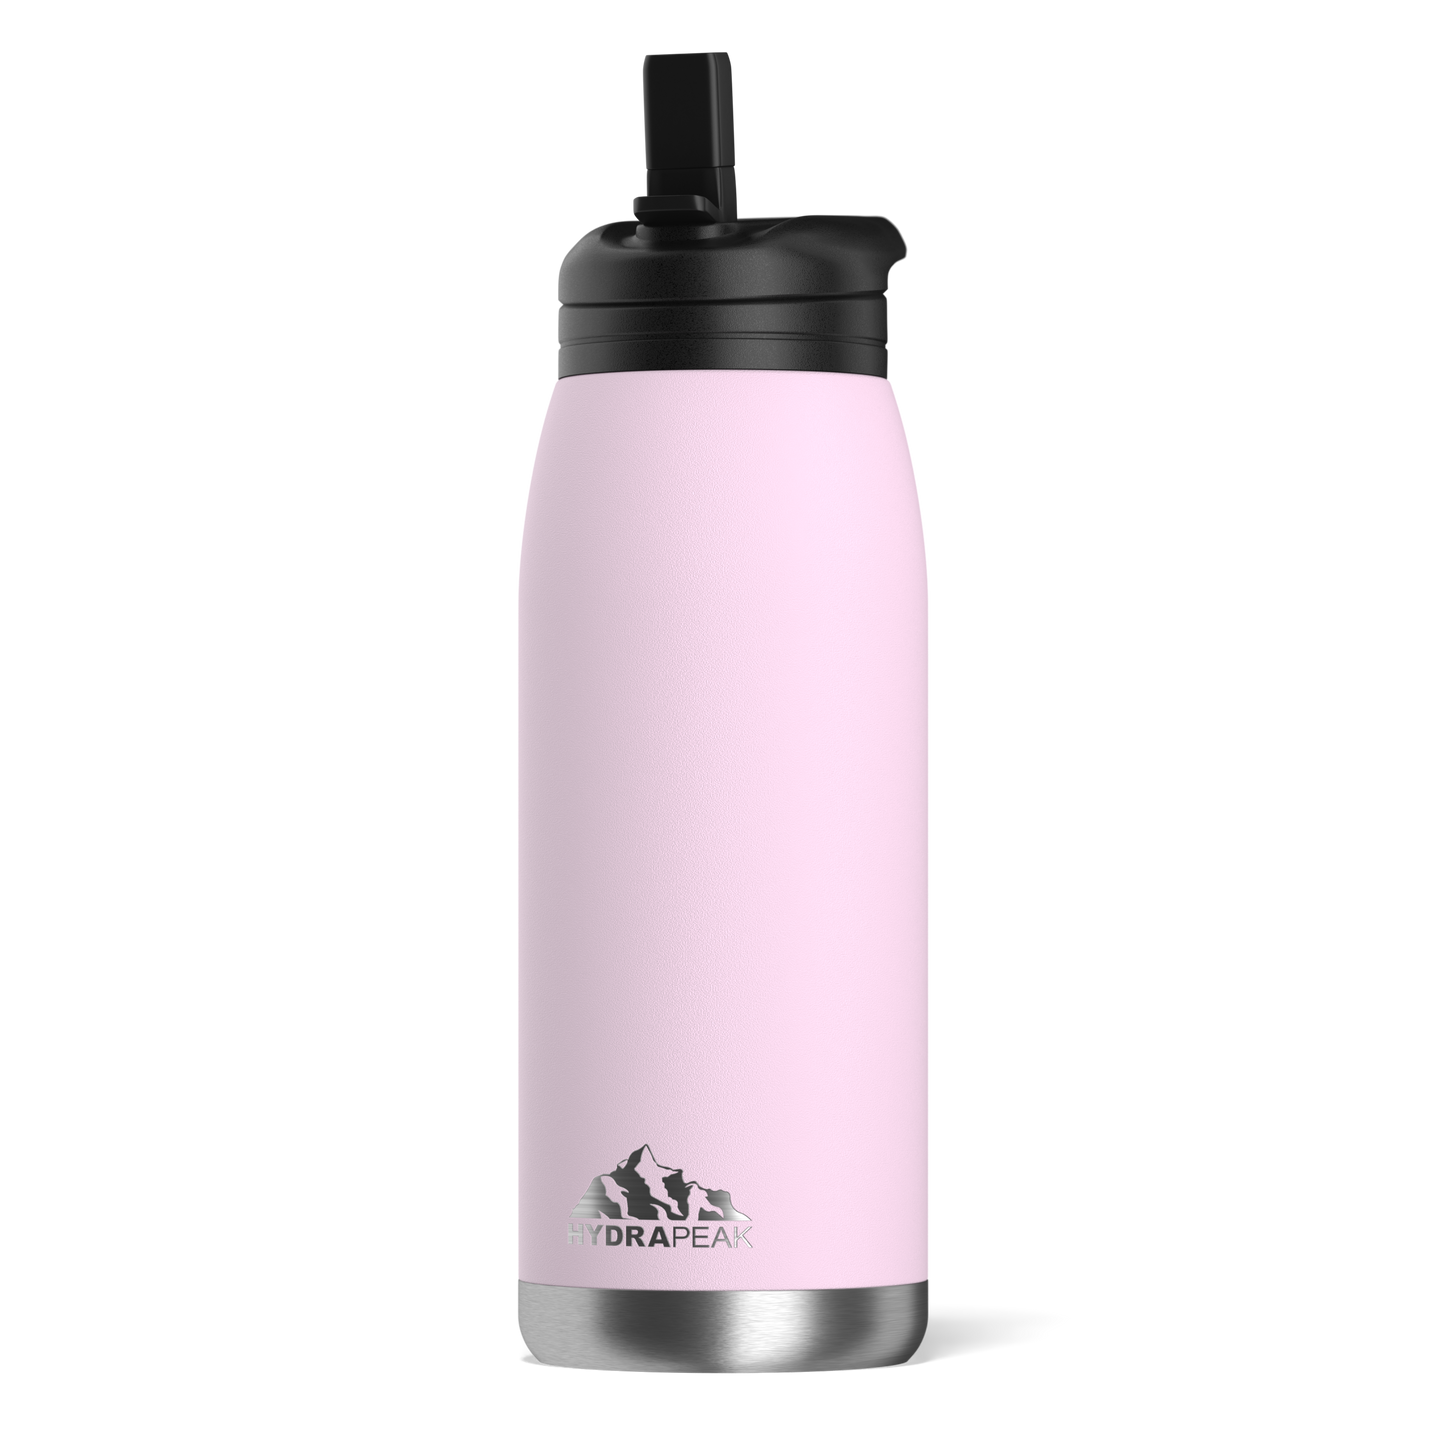 Flow 32oz Stainless Steel Insulated Water Bottle with Straw Lid Bottle- Blush